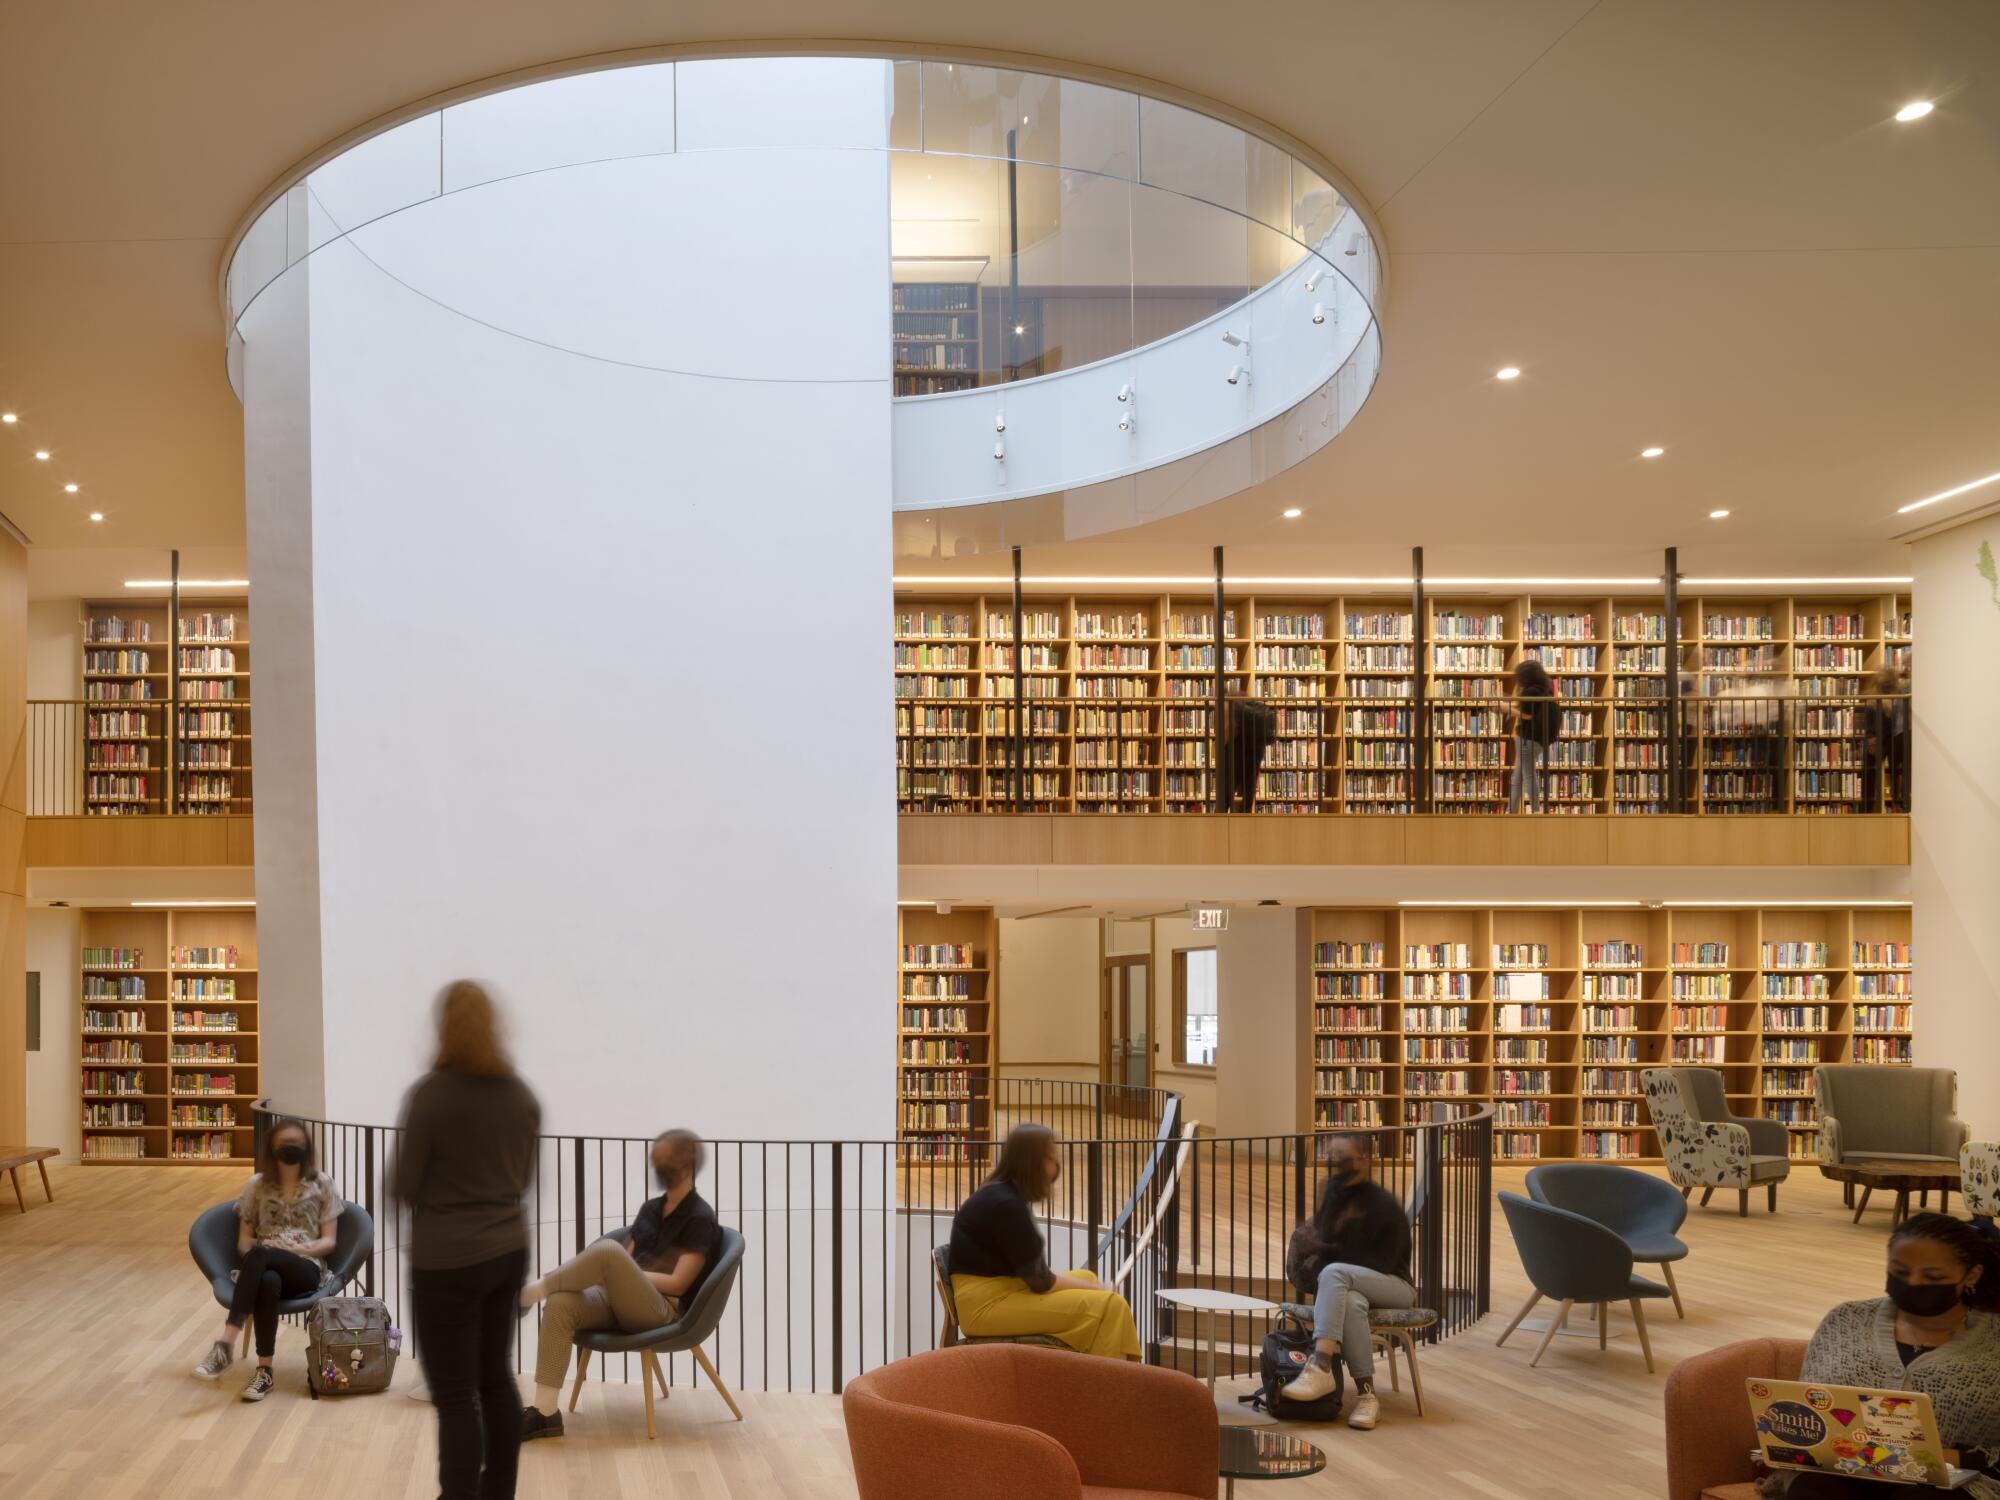 Students sit and stand in an airy two-story area lined with bookshelves that's pierced by an oculus.